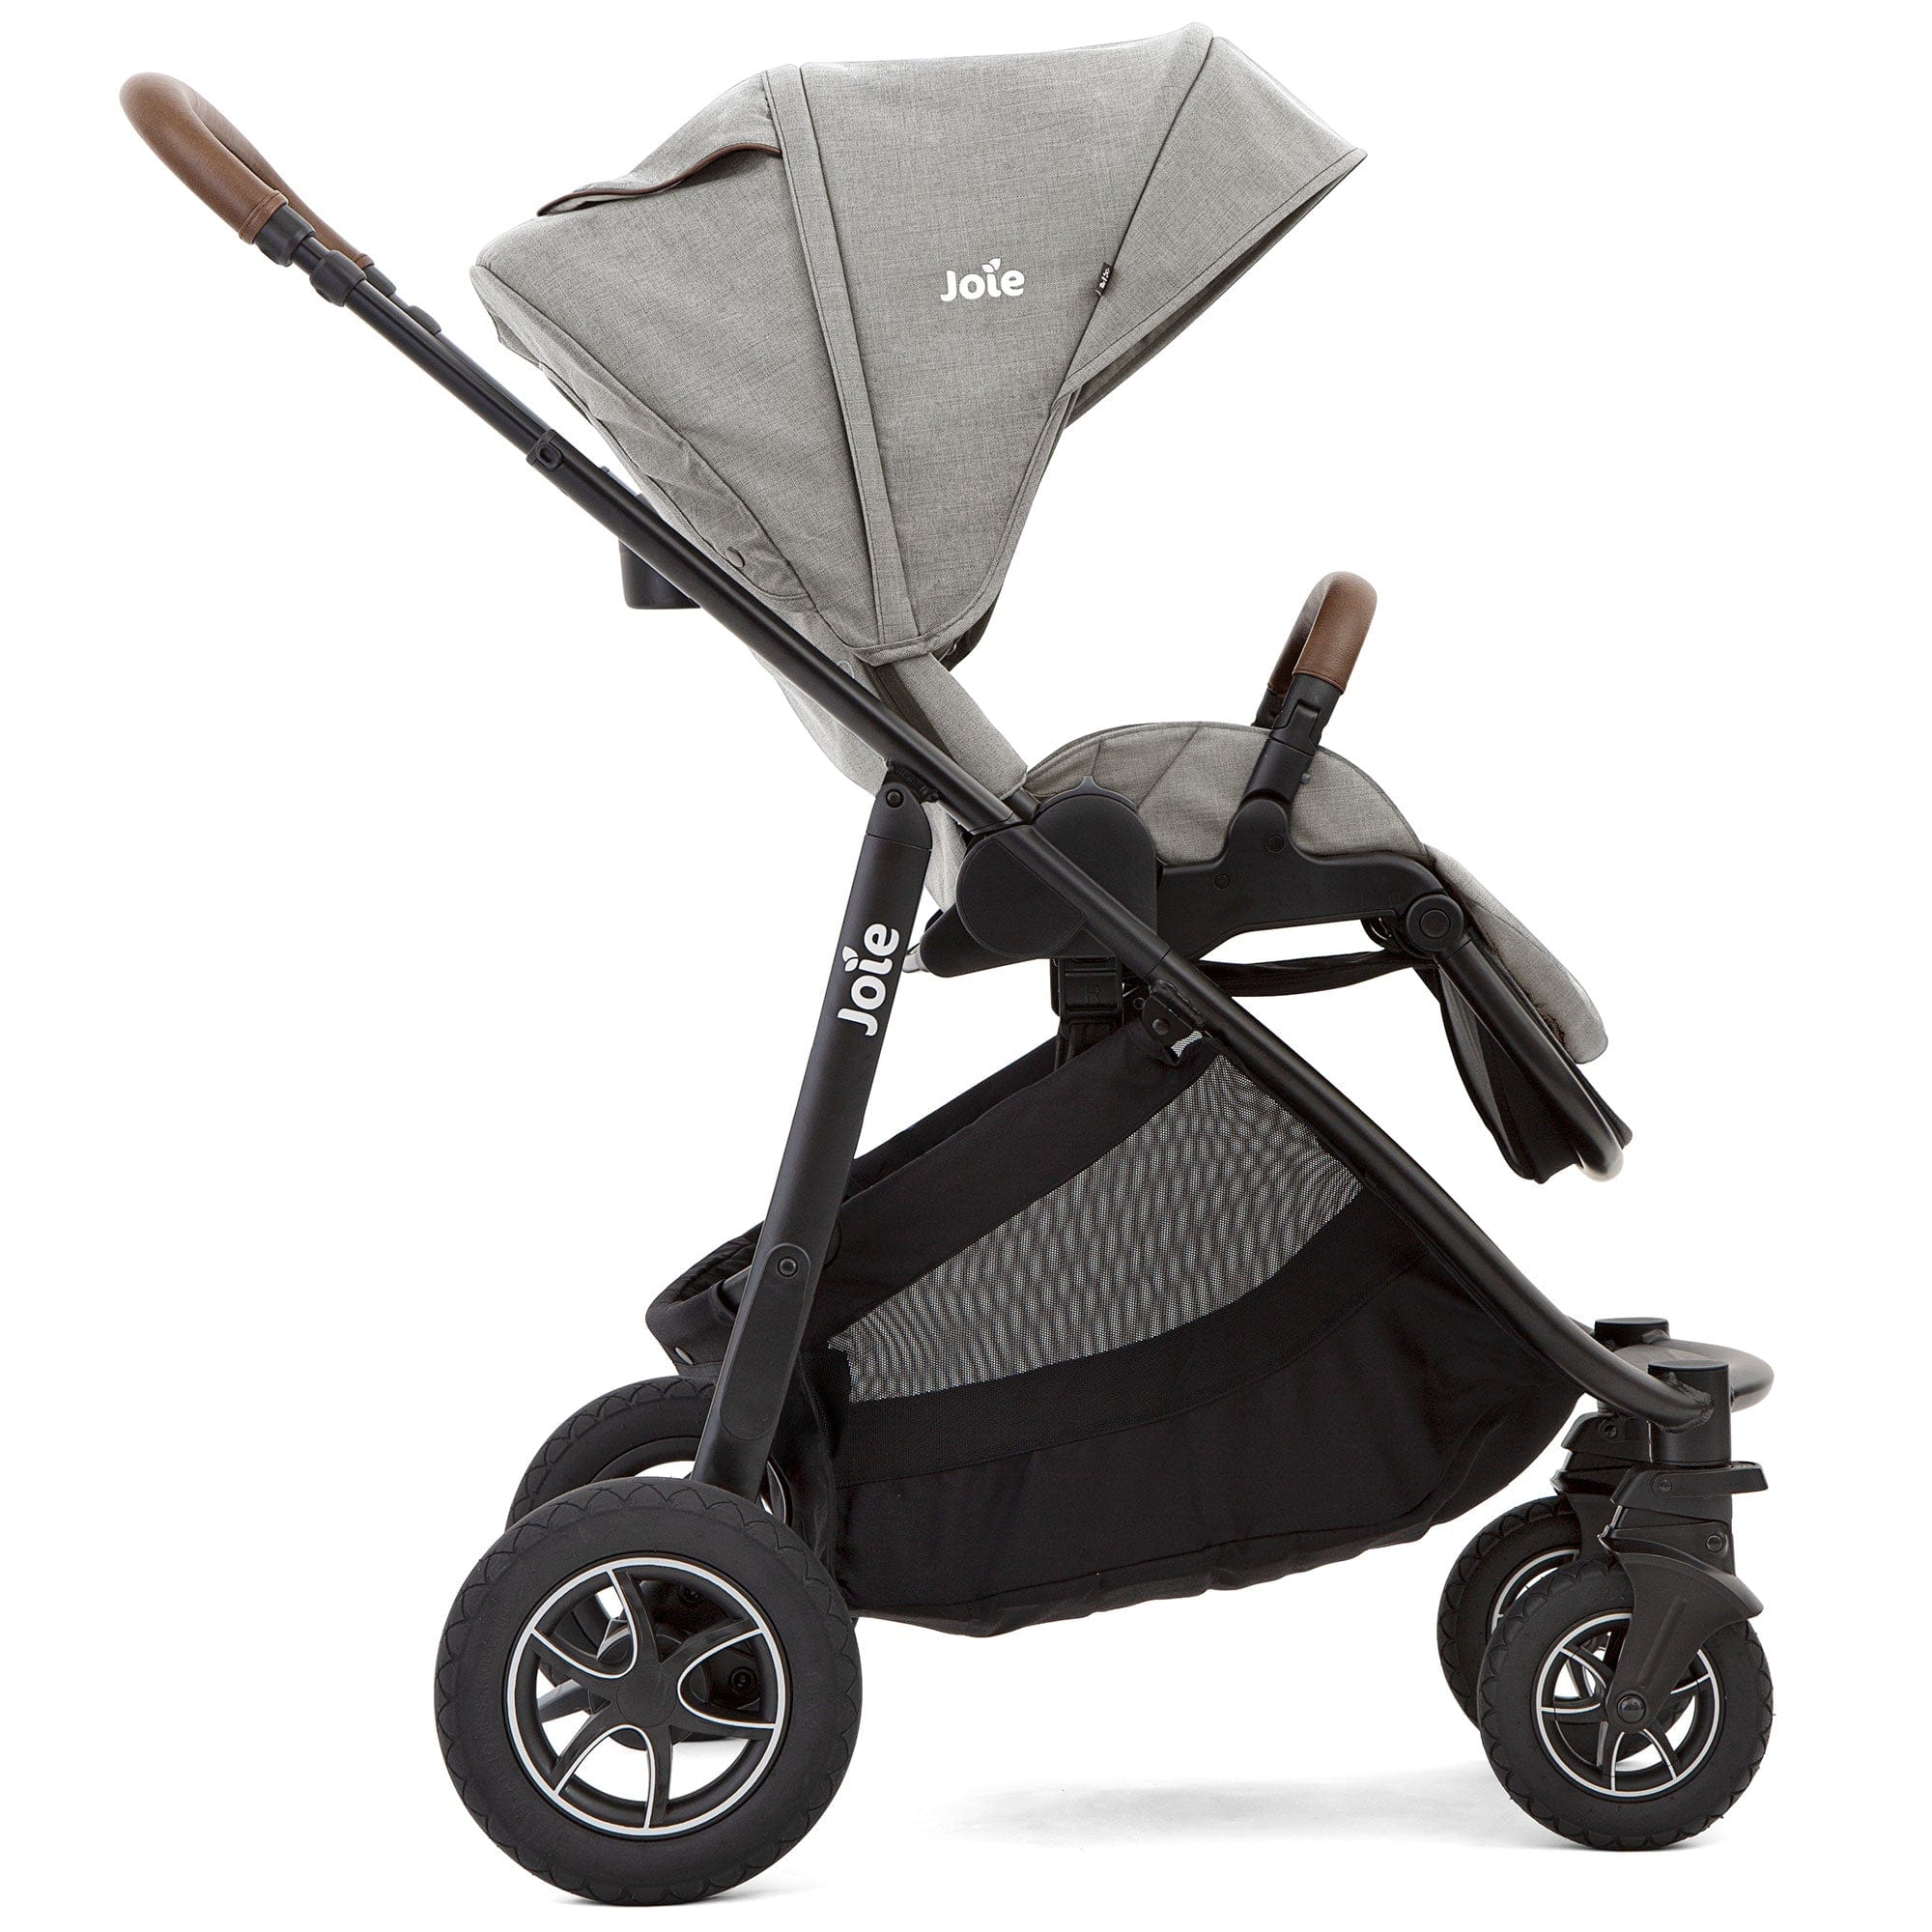 Joie Pushchairs & Buggies Joie Versatrax Stroller and Ramble XL Carrycot in Pebble